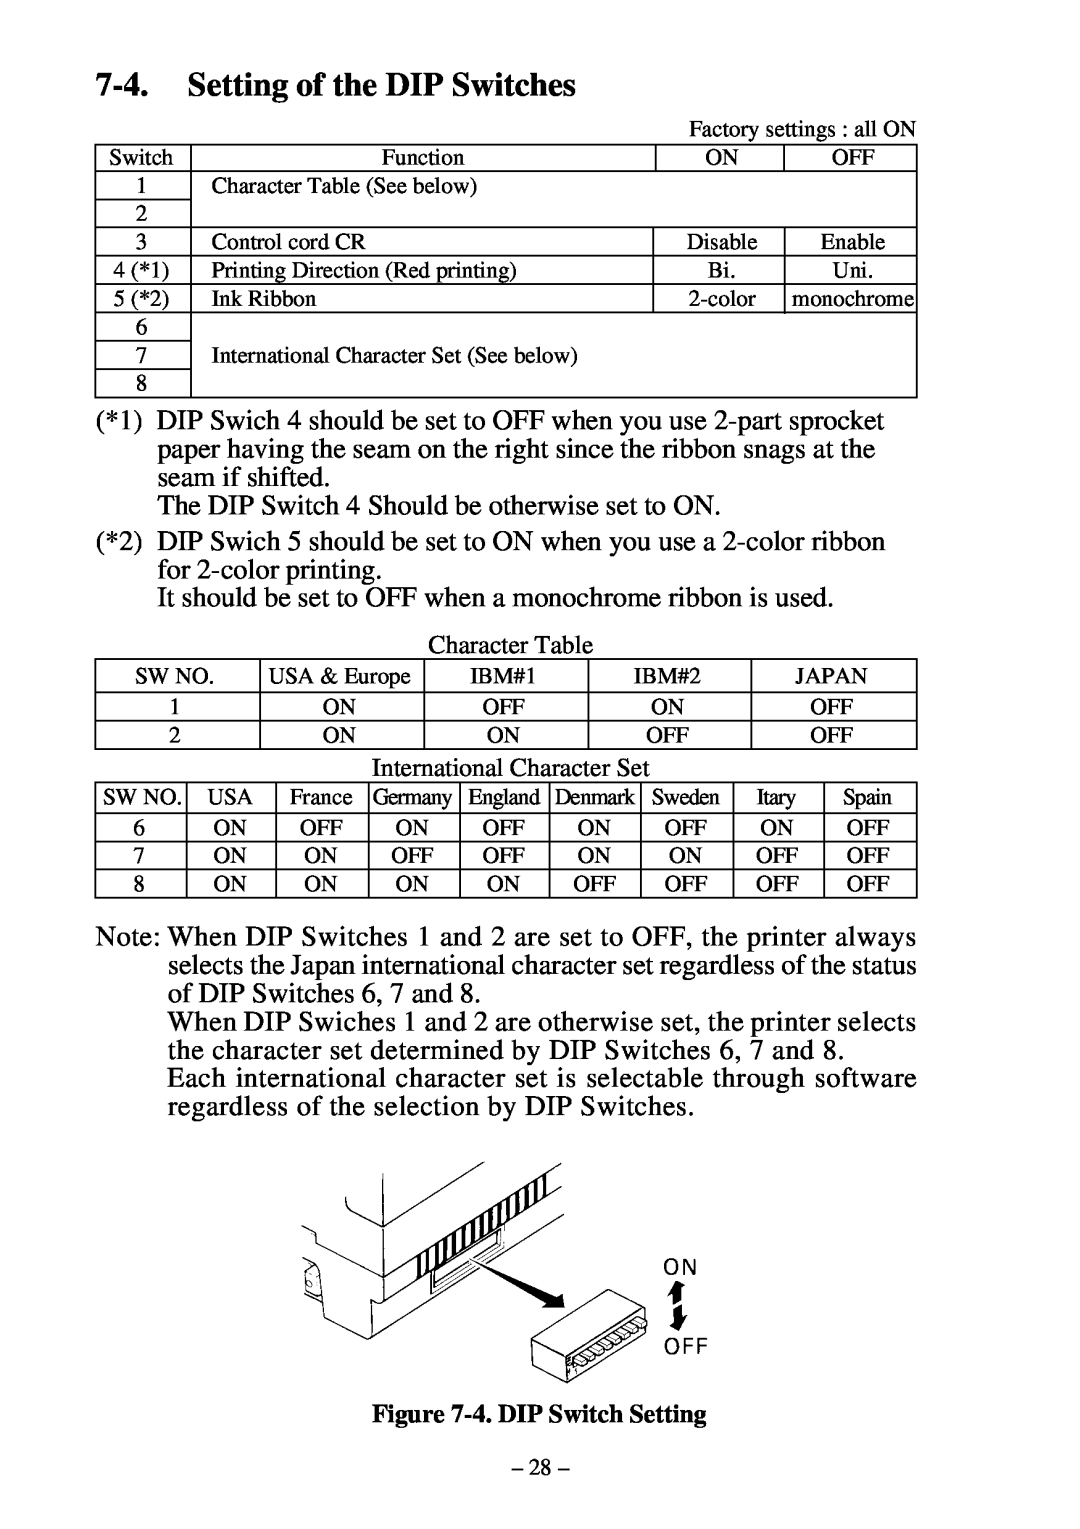 Star Micronics DP8340 user manual Setting of the DIP Switches 